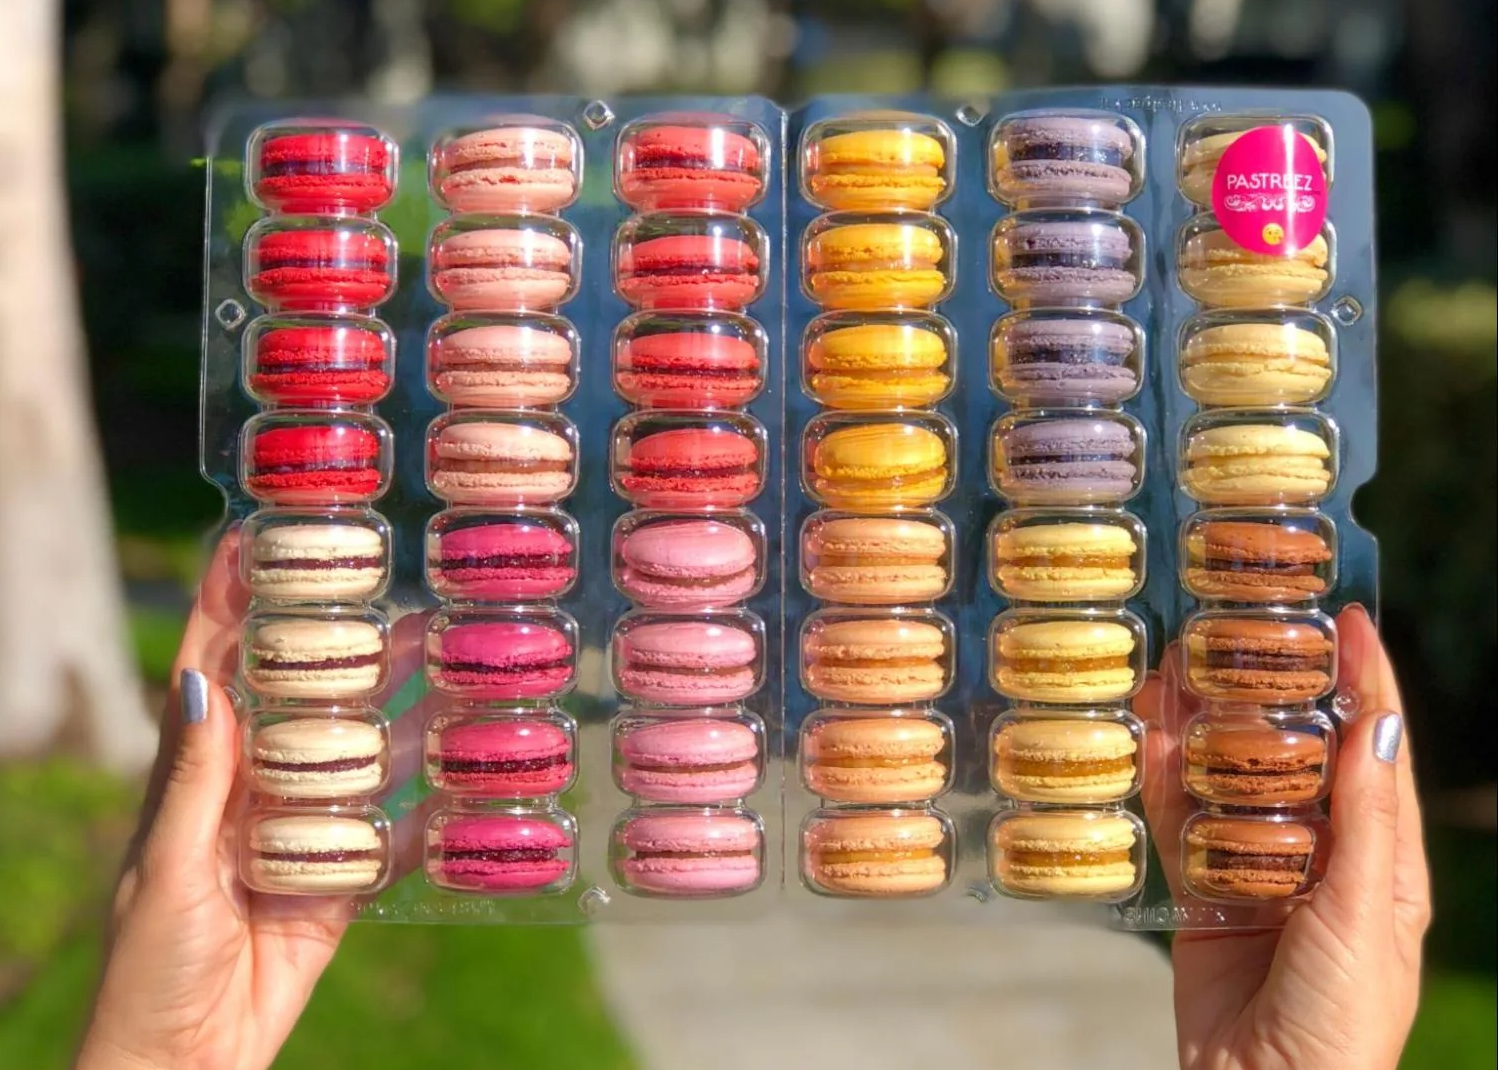 A person holds up a tray of macarons